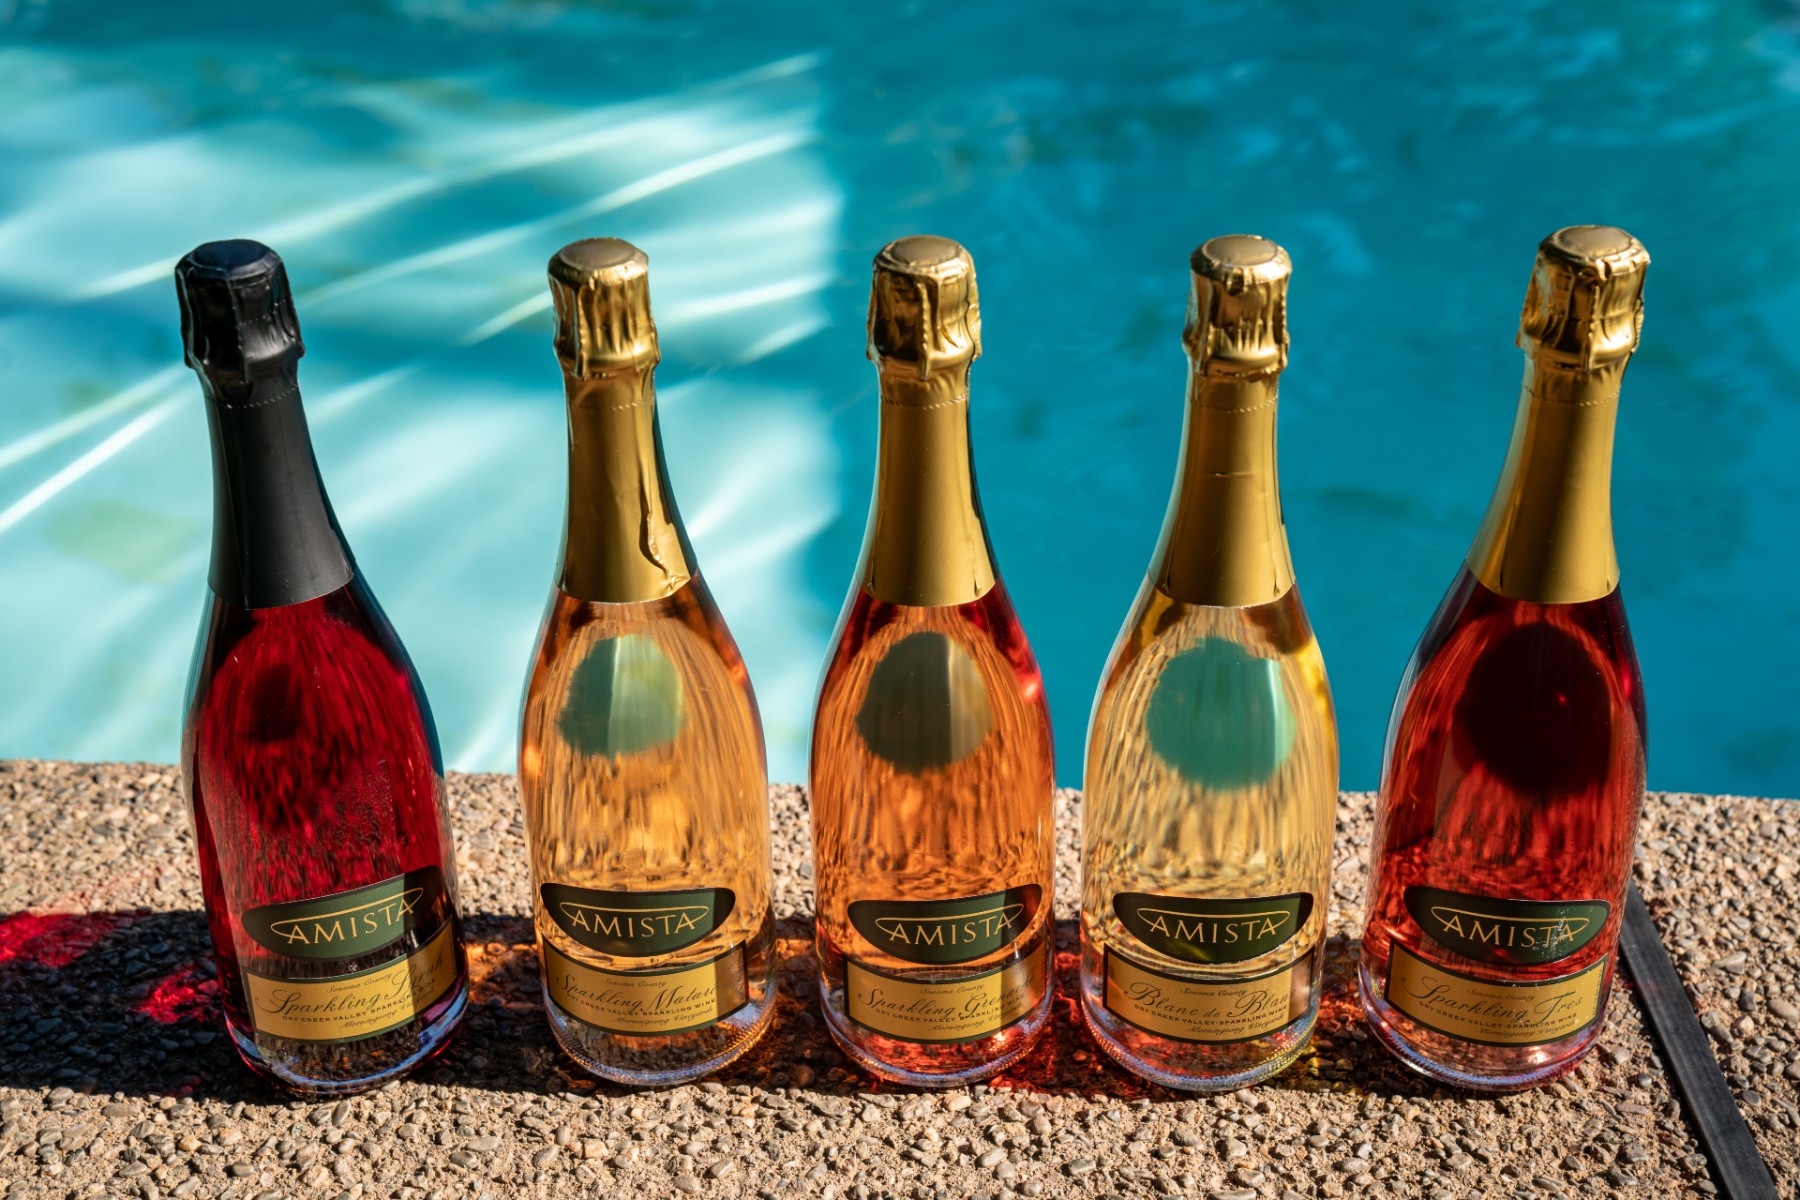 Bottles of Sparkling Wines from Amista Vineyards